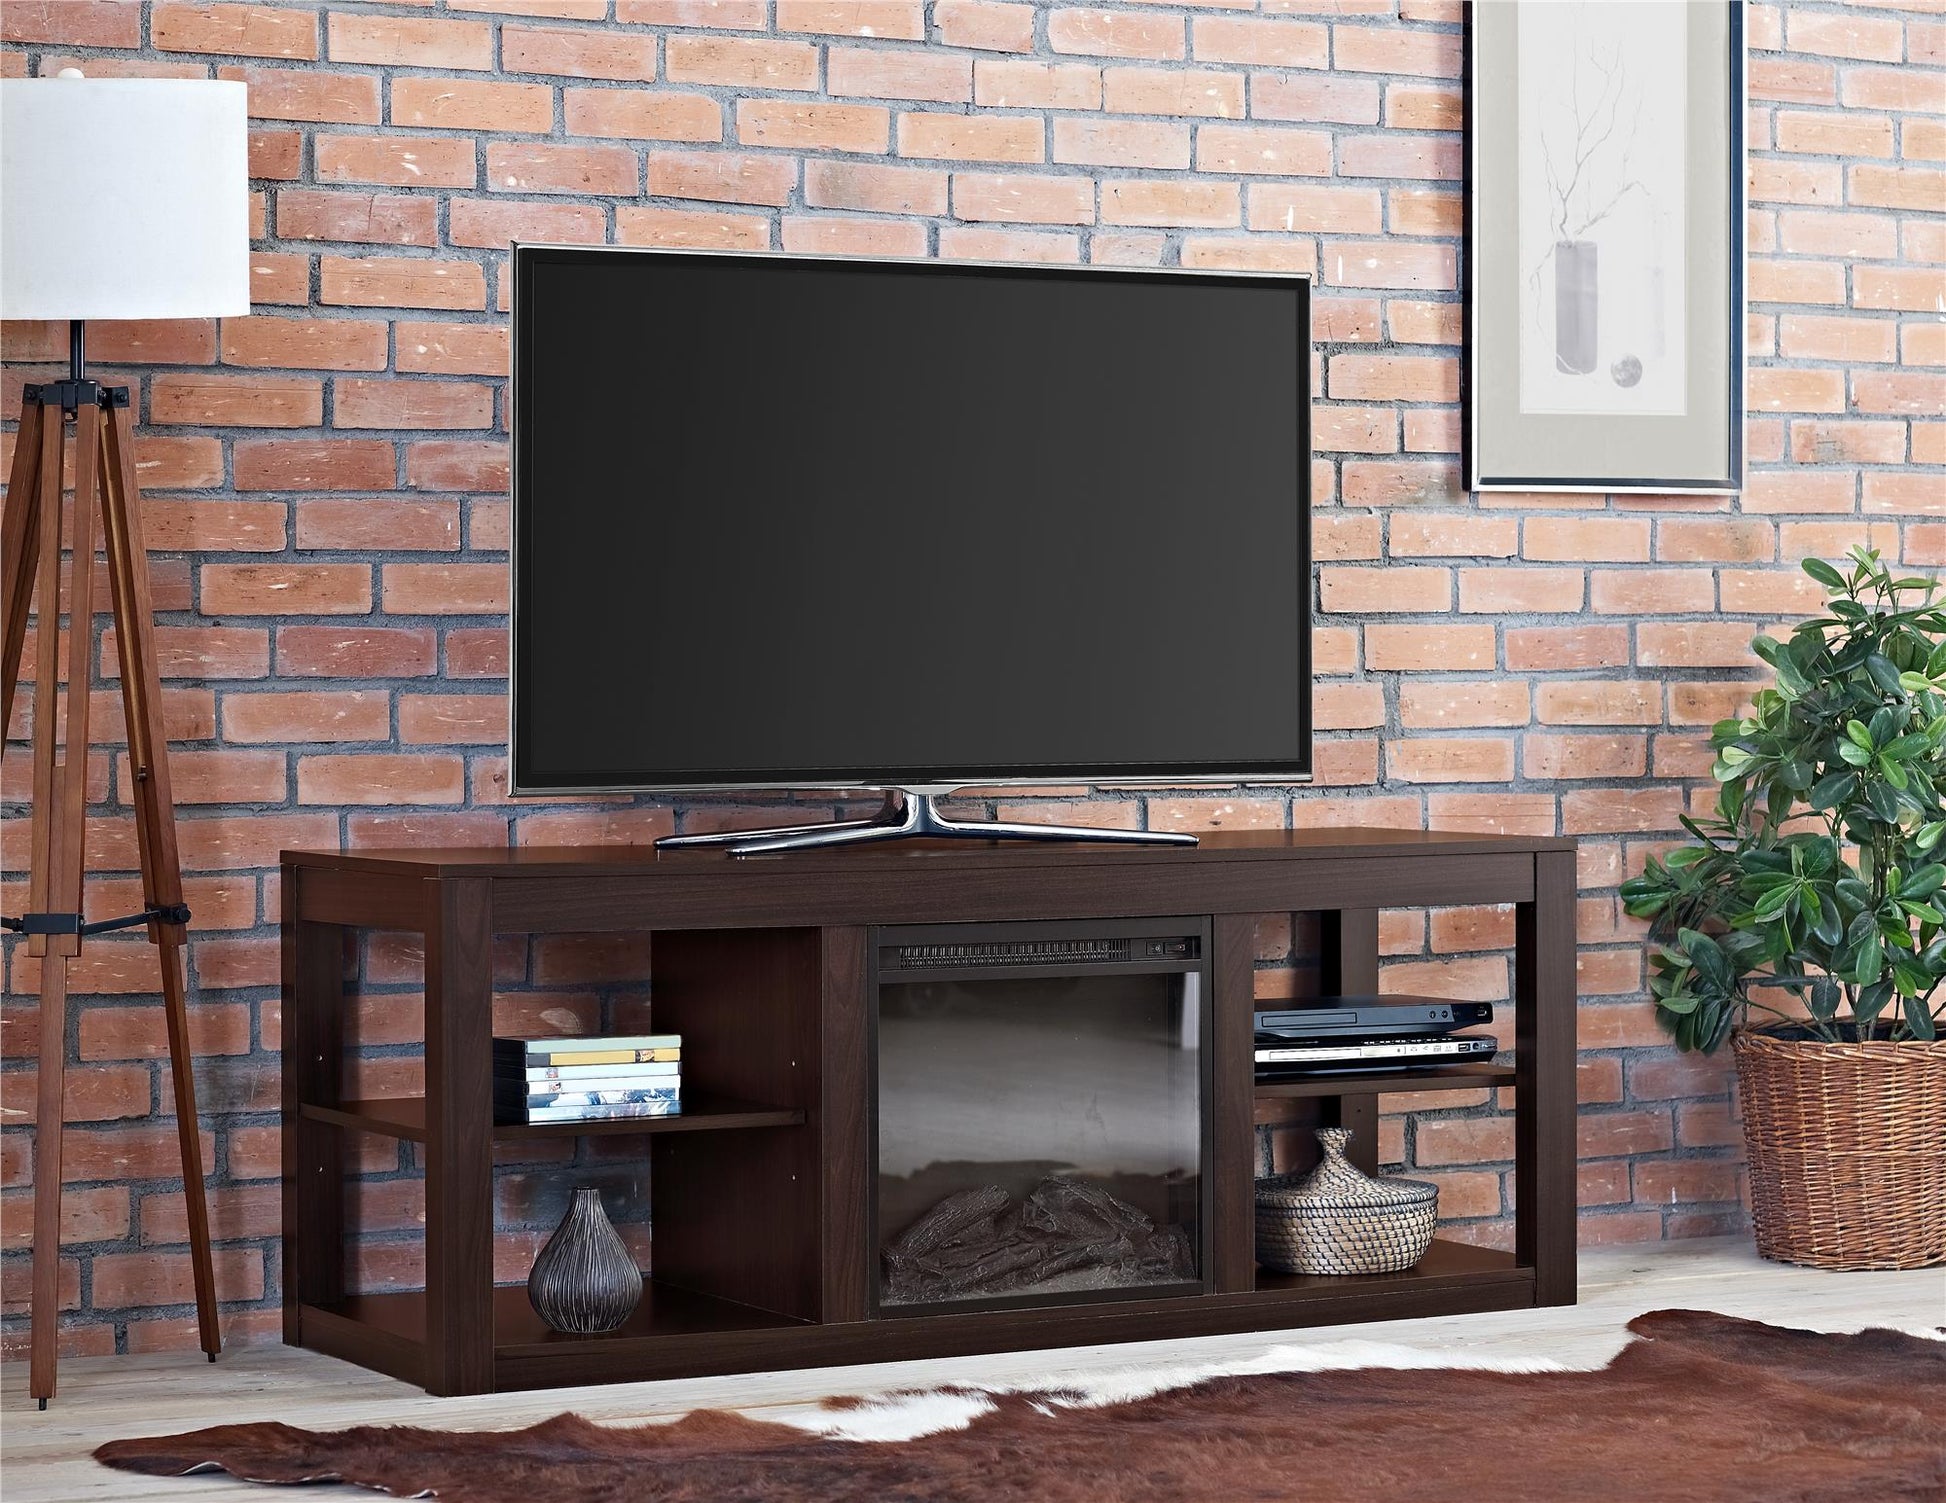 Parsons Electric Fireplace TV Stand for TVs up to 65 Inches - Espresso